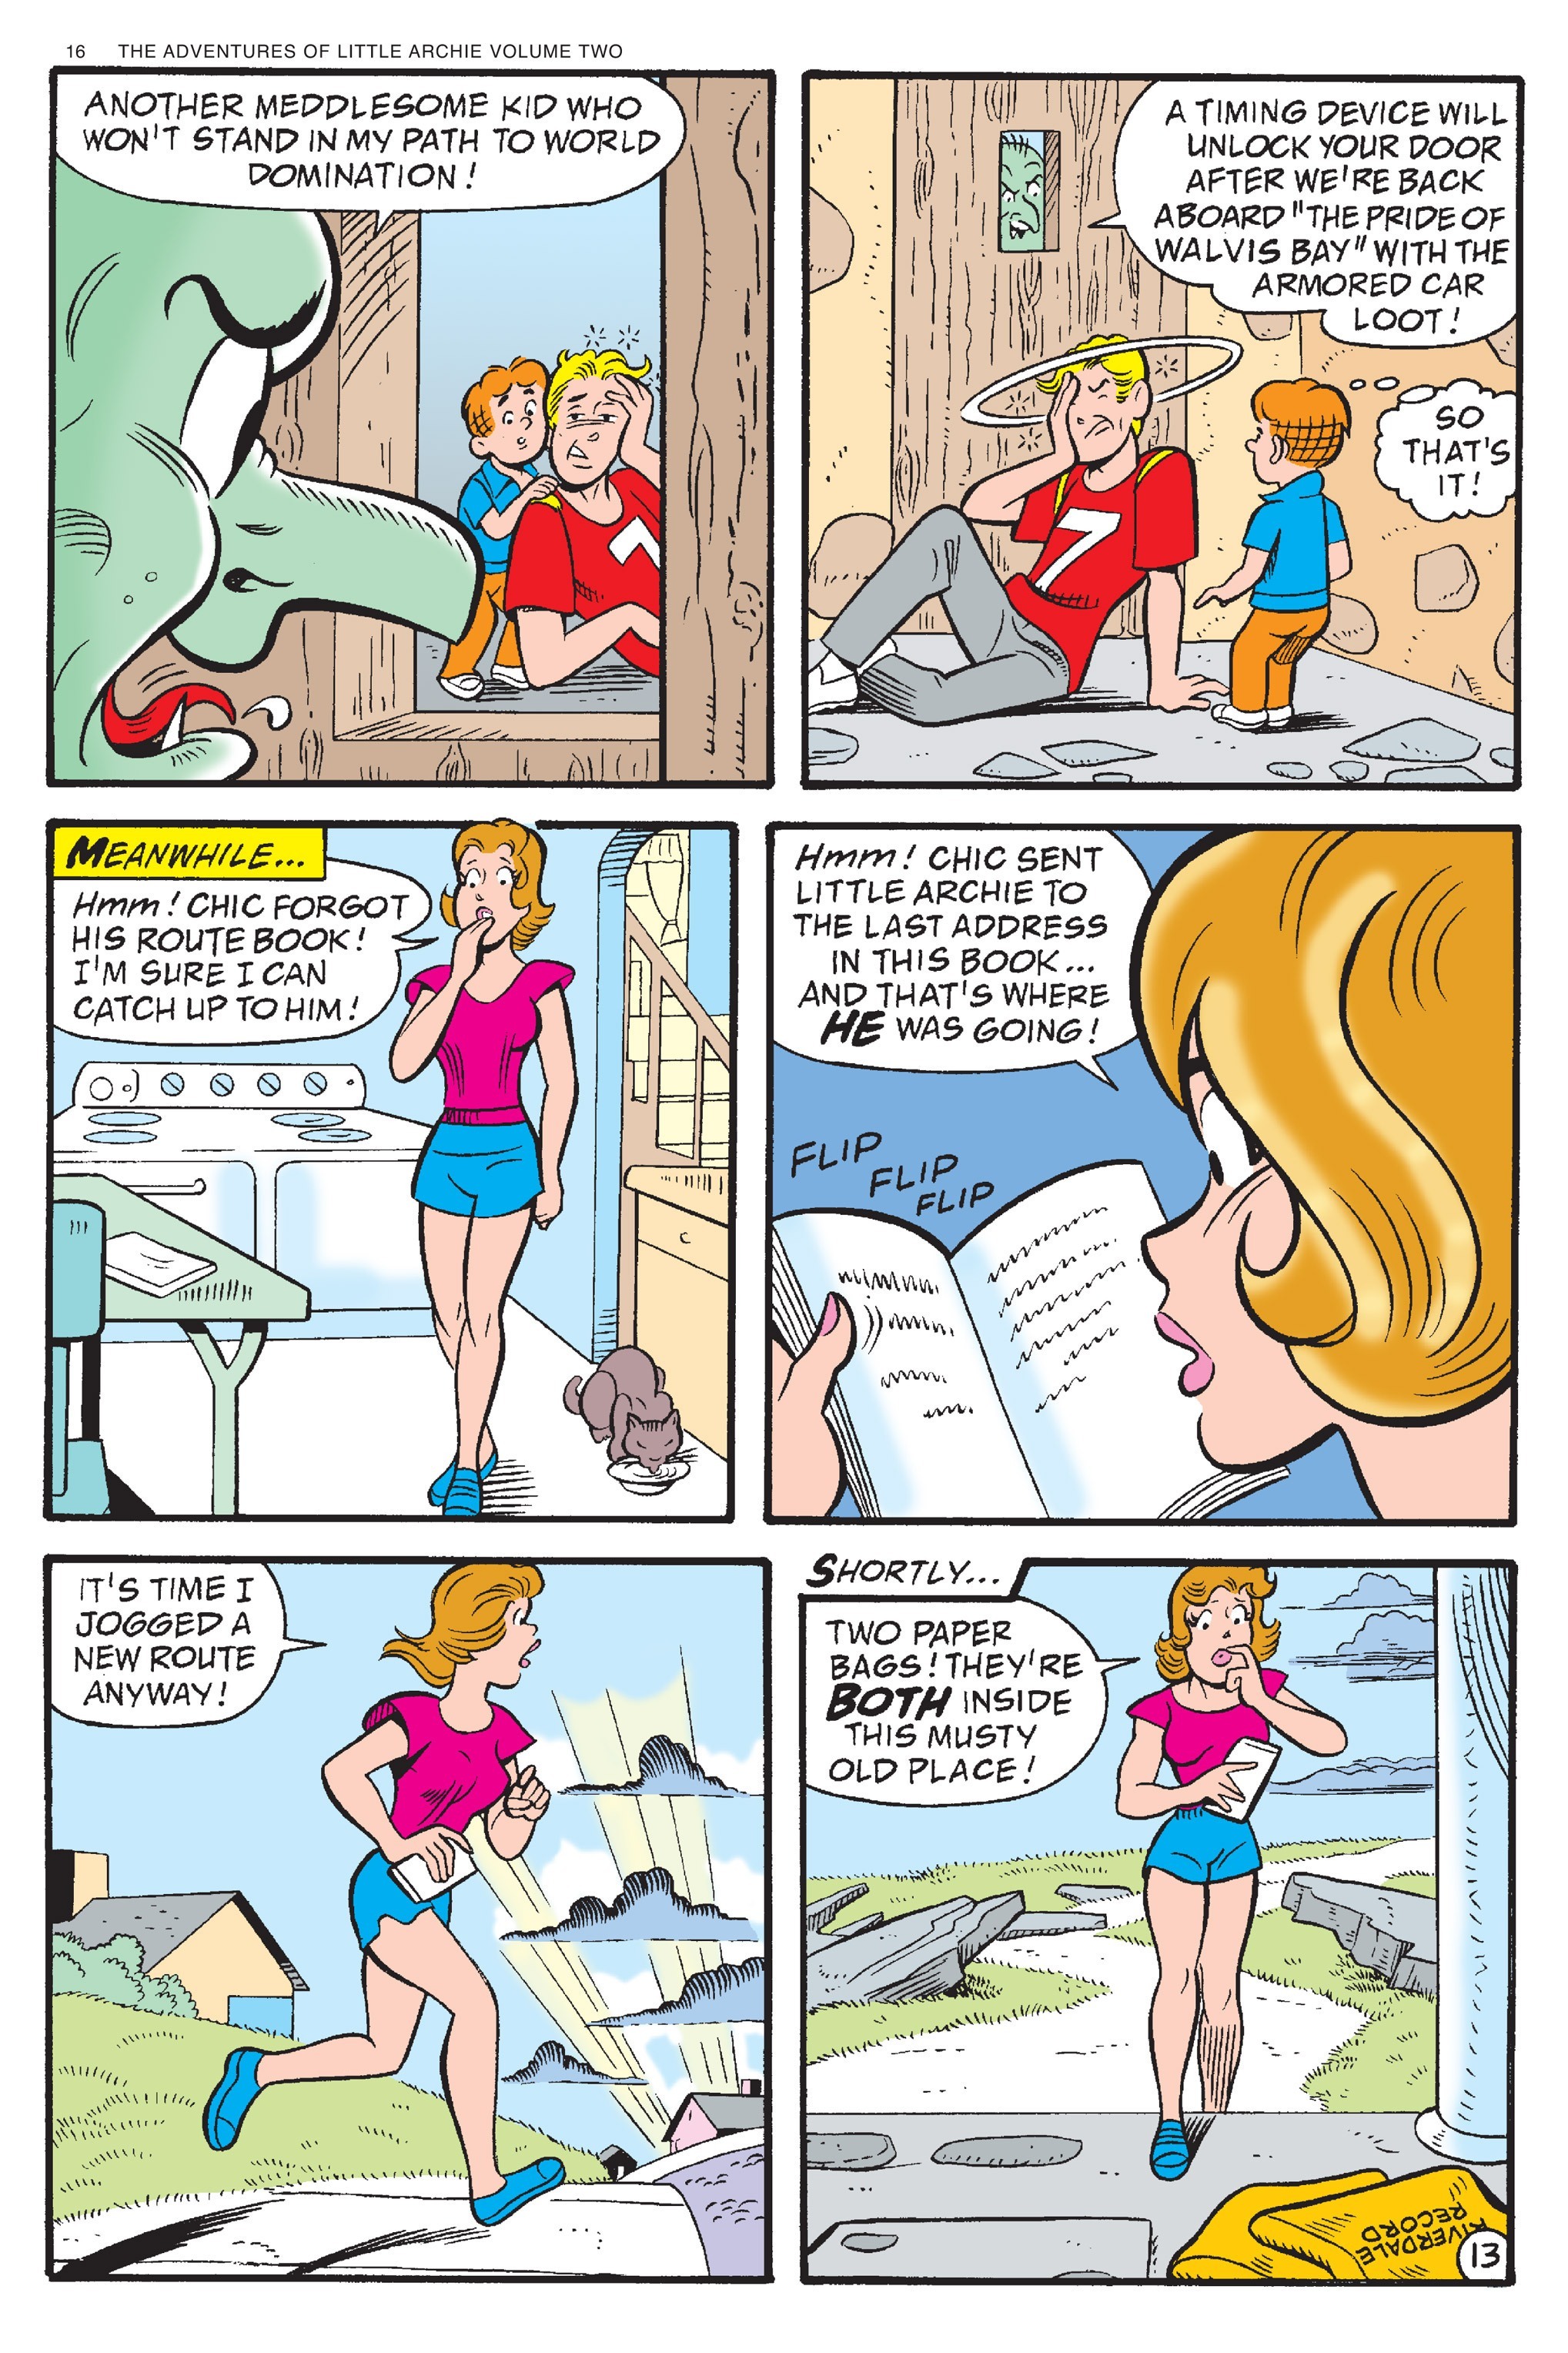 Read online Adventures of Little Archie comic -  Issue # TPB 2 - 17